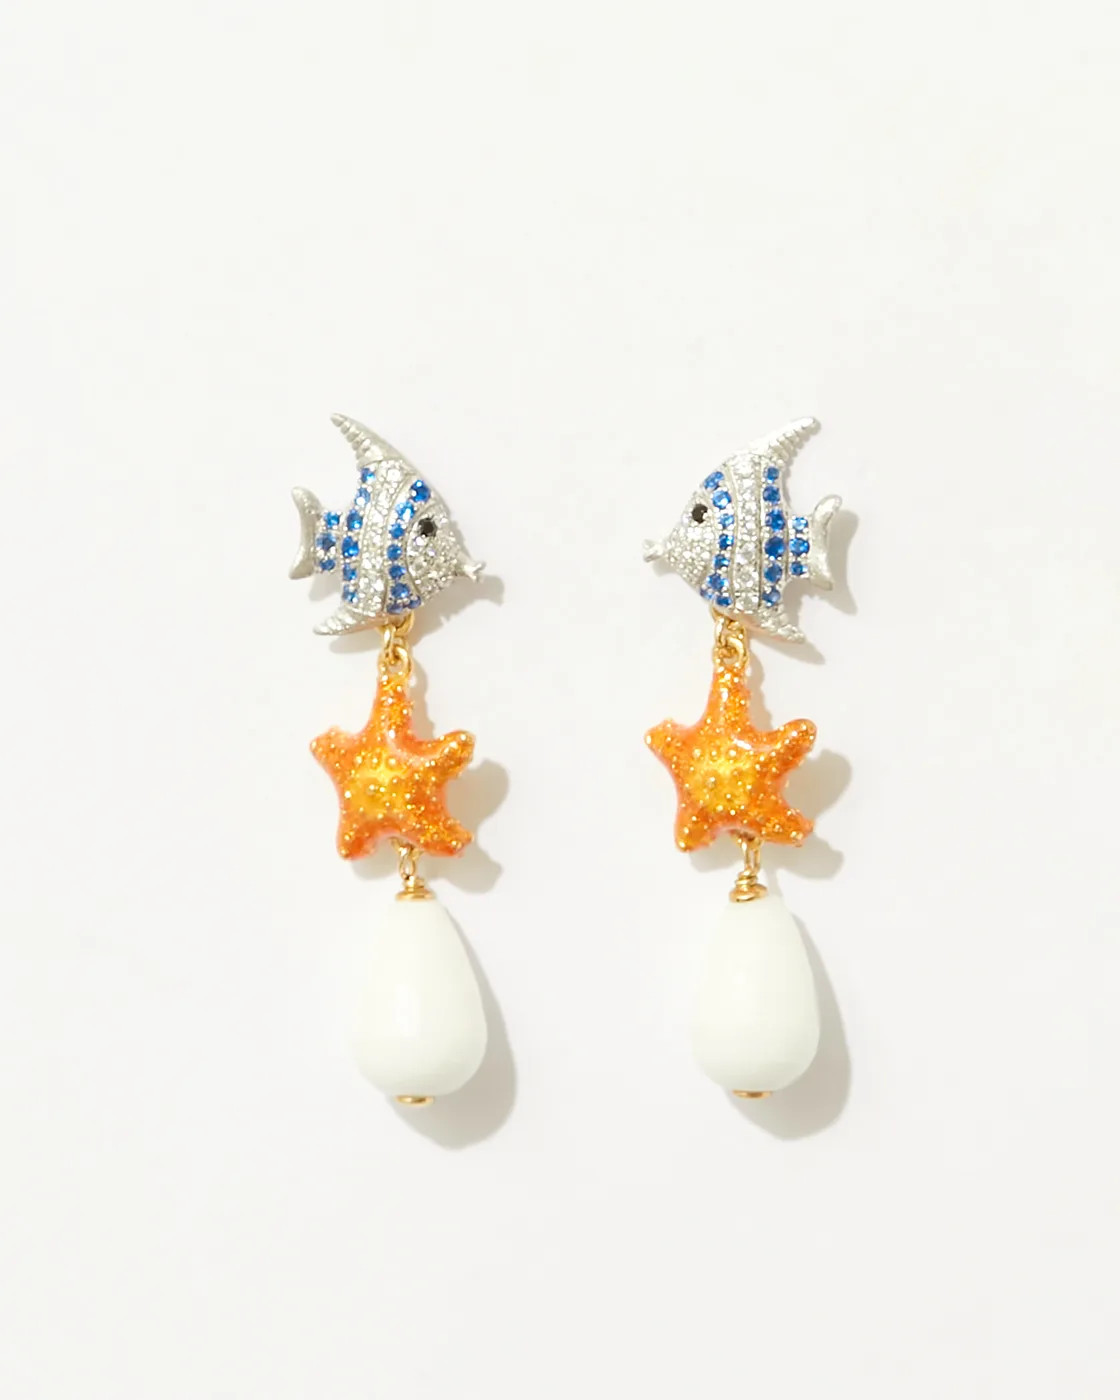 Isla De Mujeres Fish and Starfish Earrings with Agate